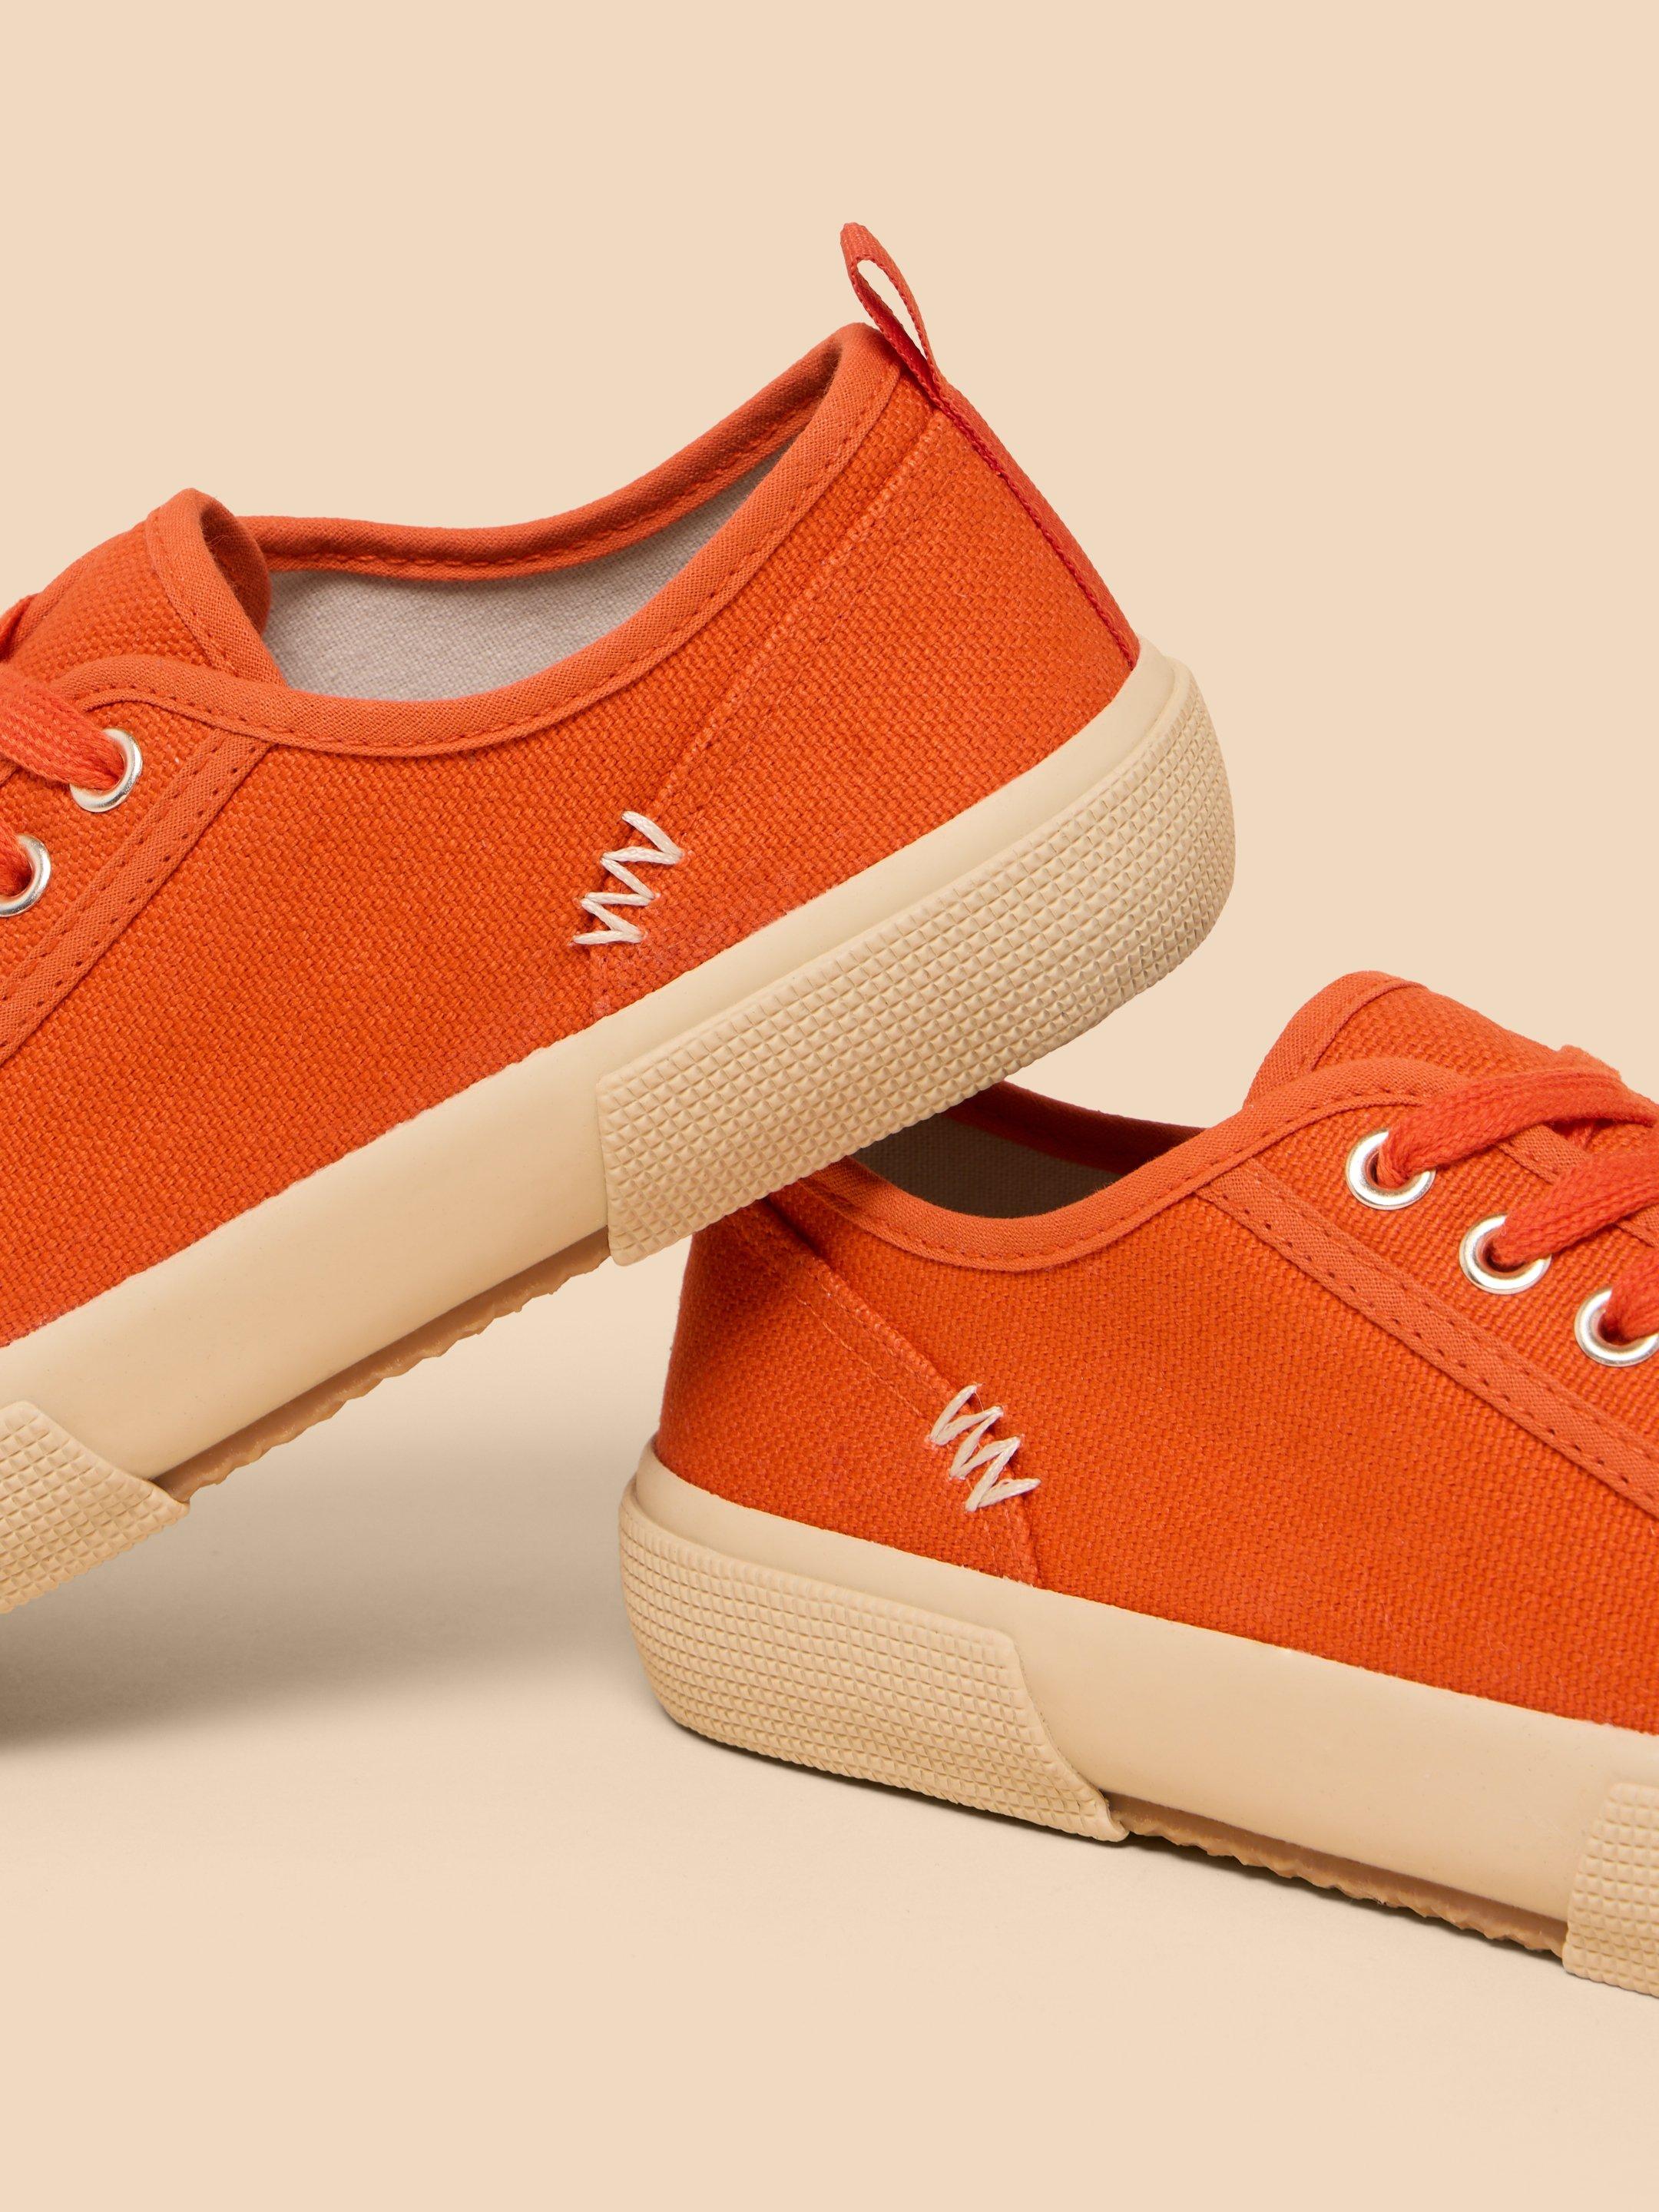 Pippa Canvas Lace Up Trainer in BRT ORANGE - FLAT BACK